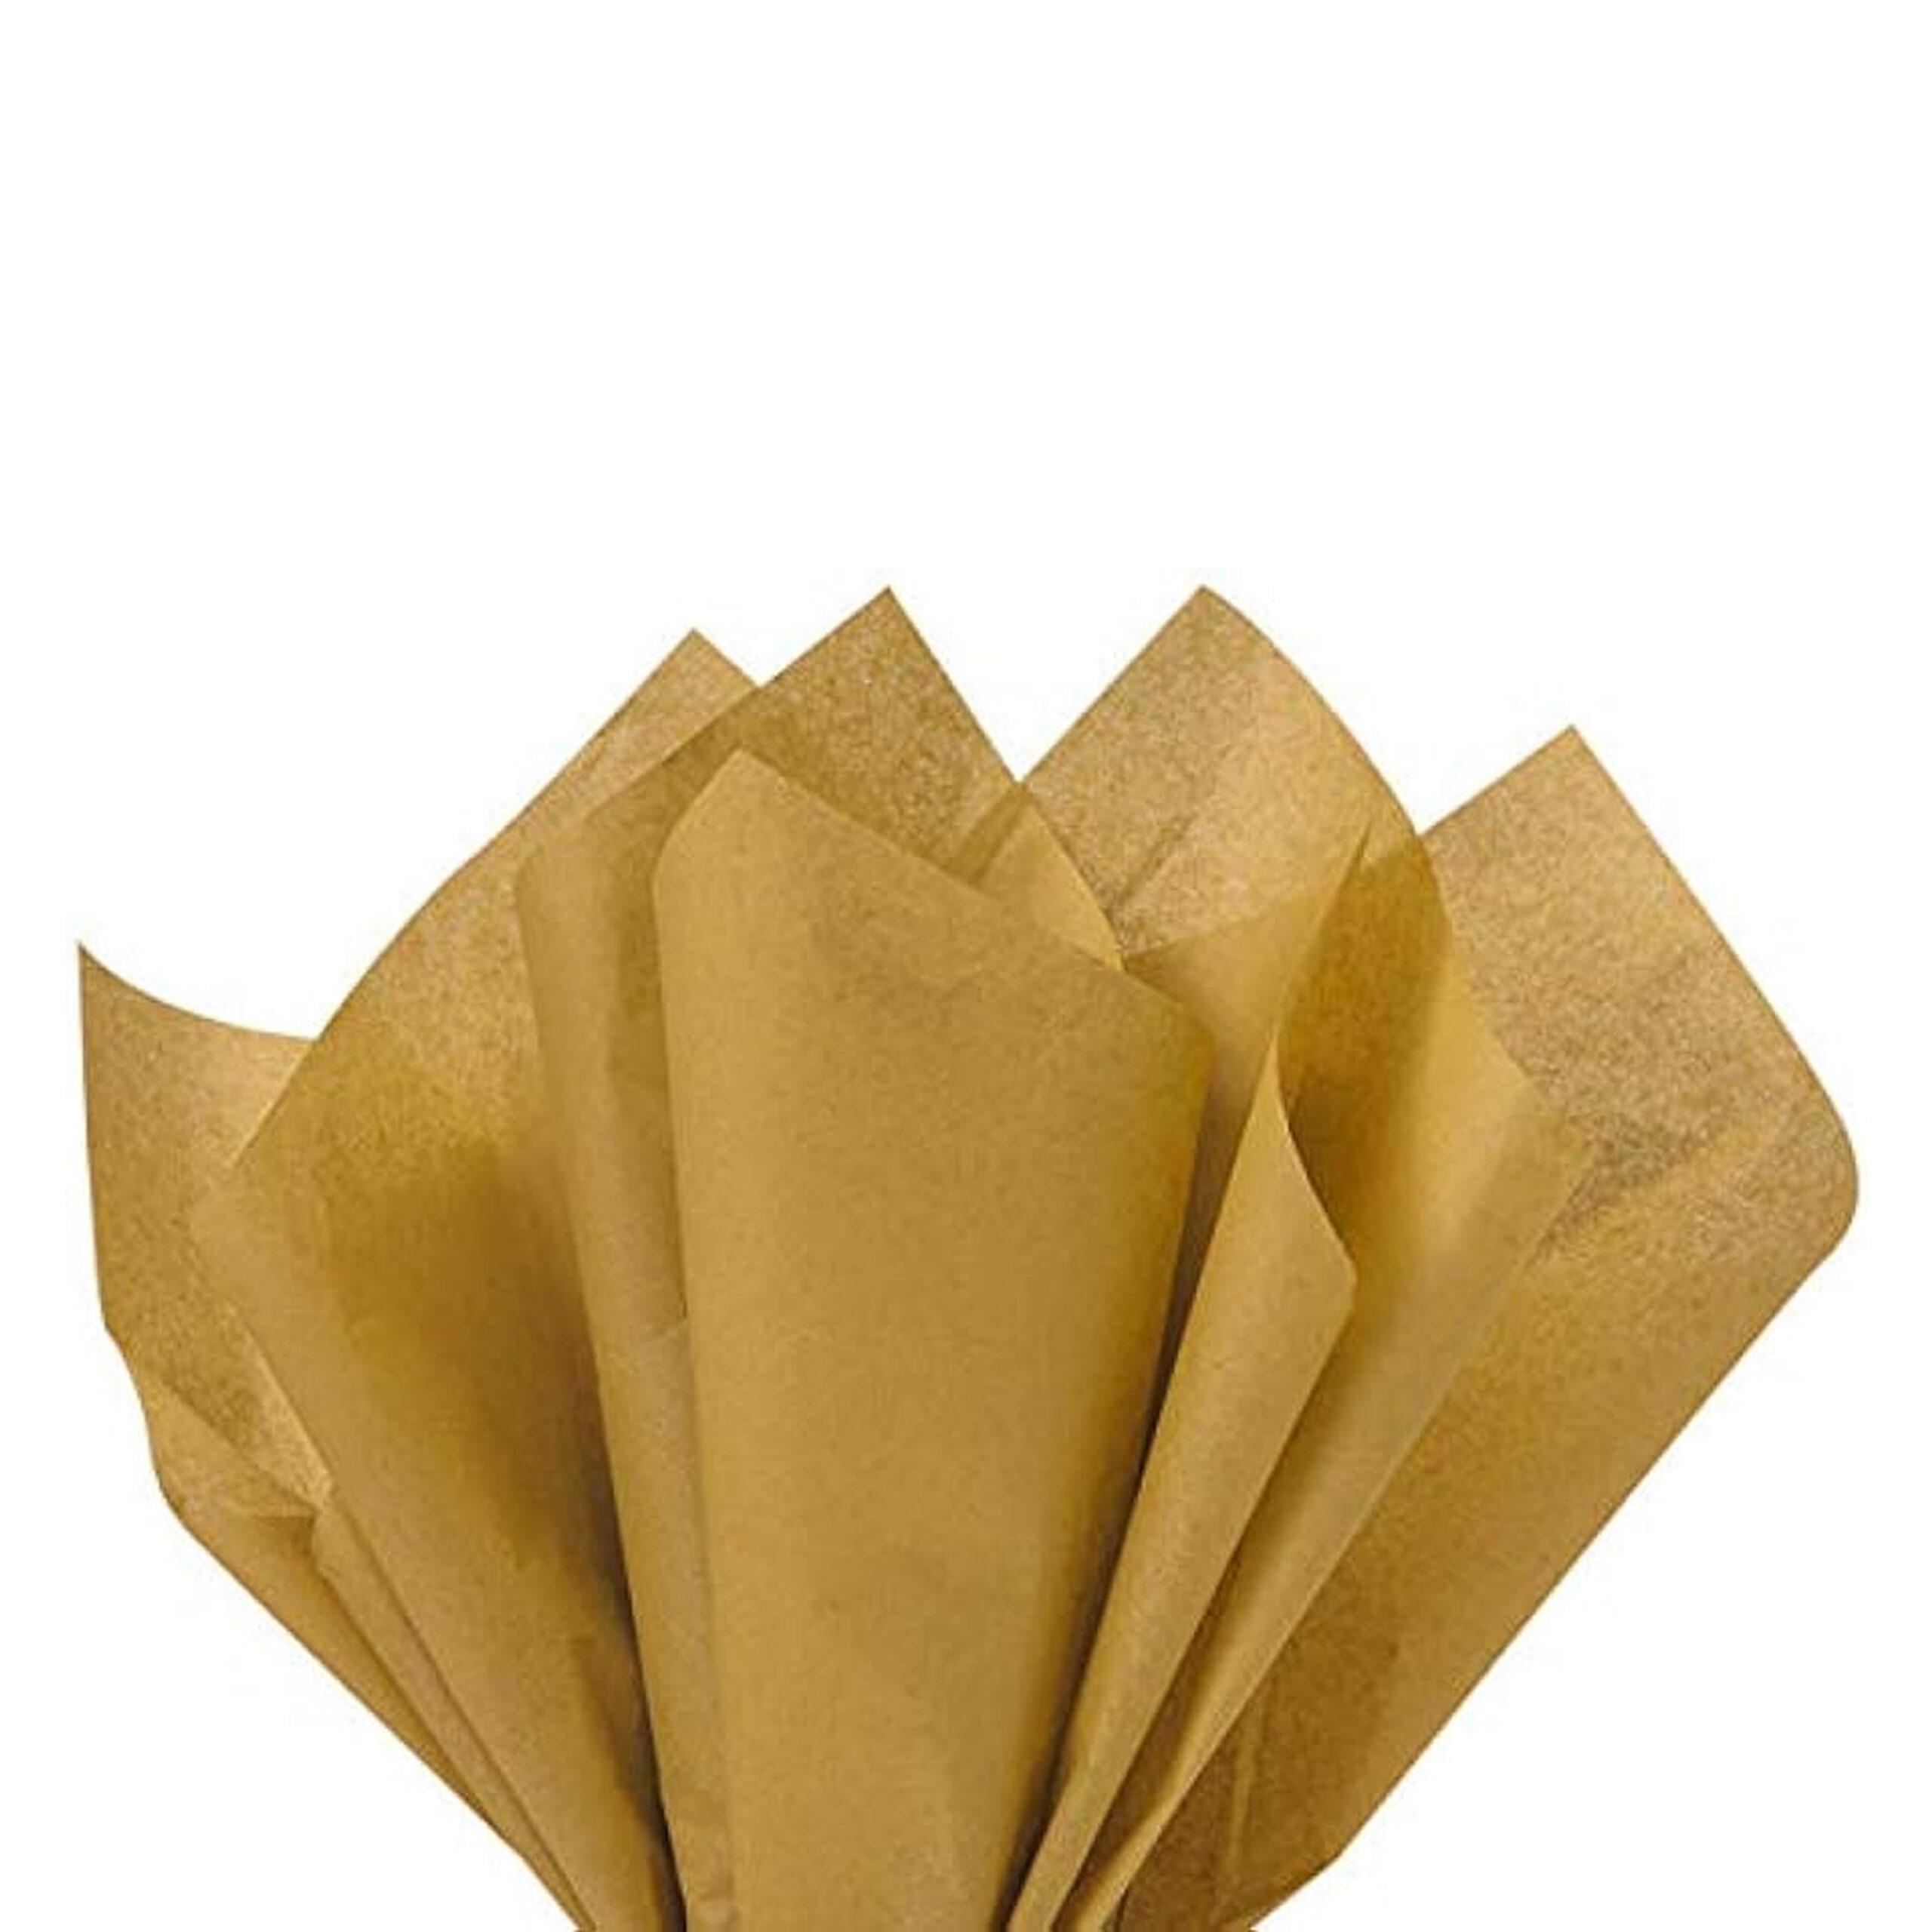 TISSUE PAPER
GOLD 10 SHEETS
50x66cm